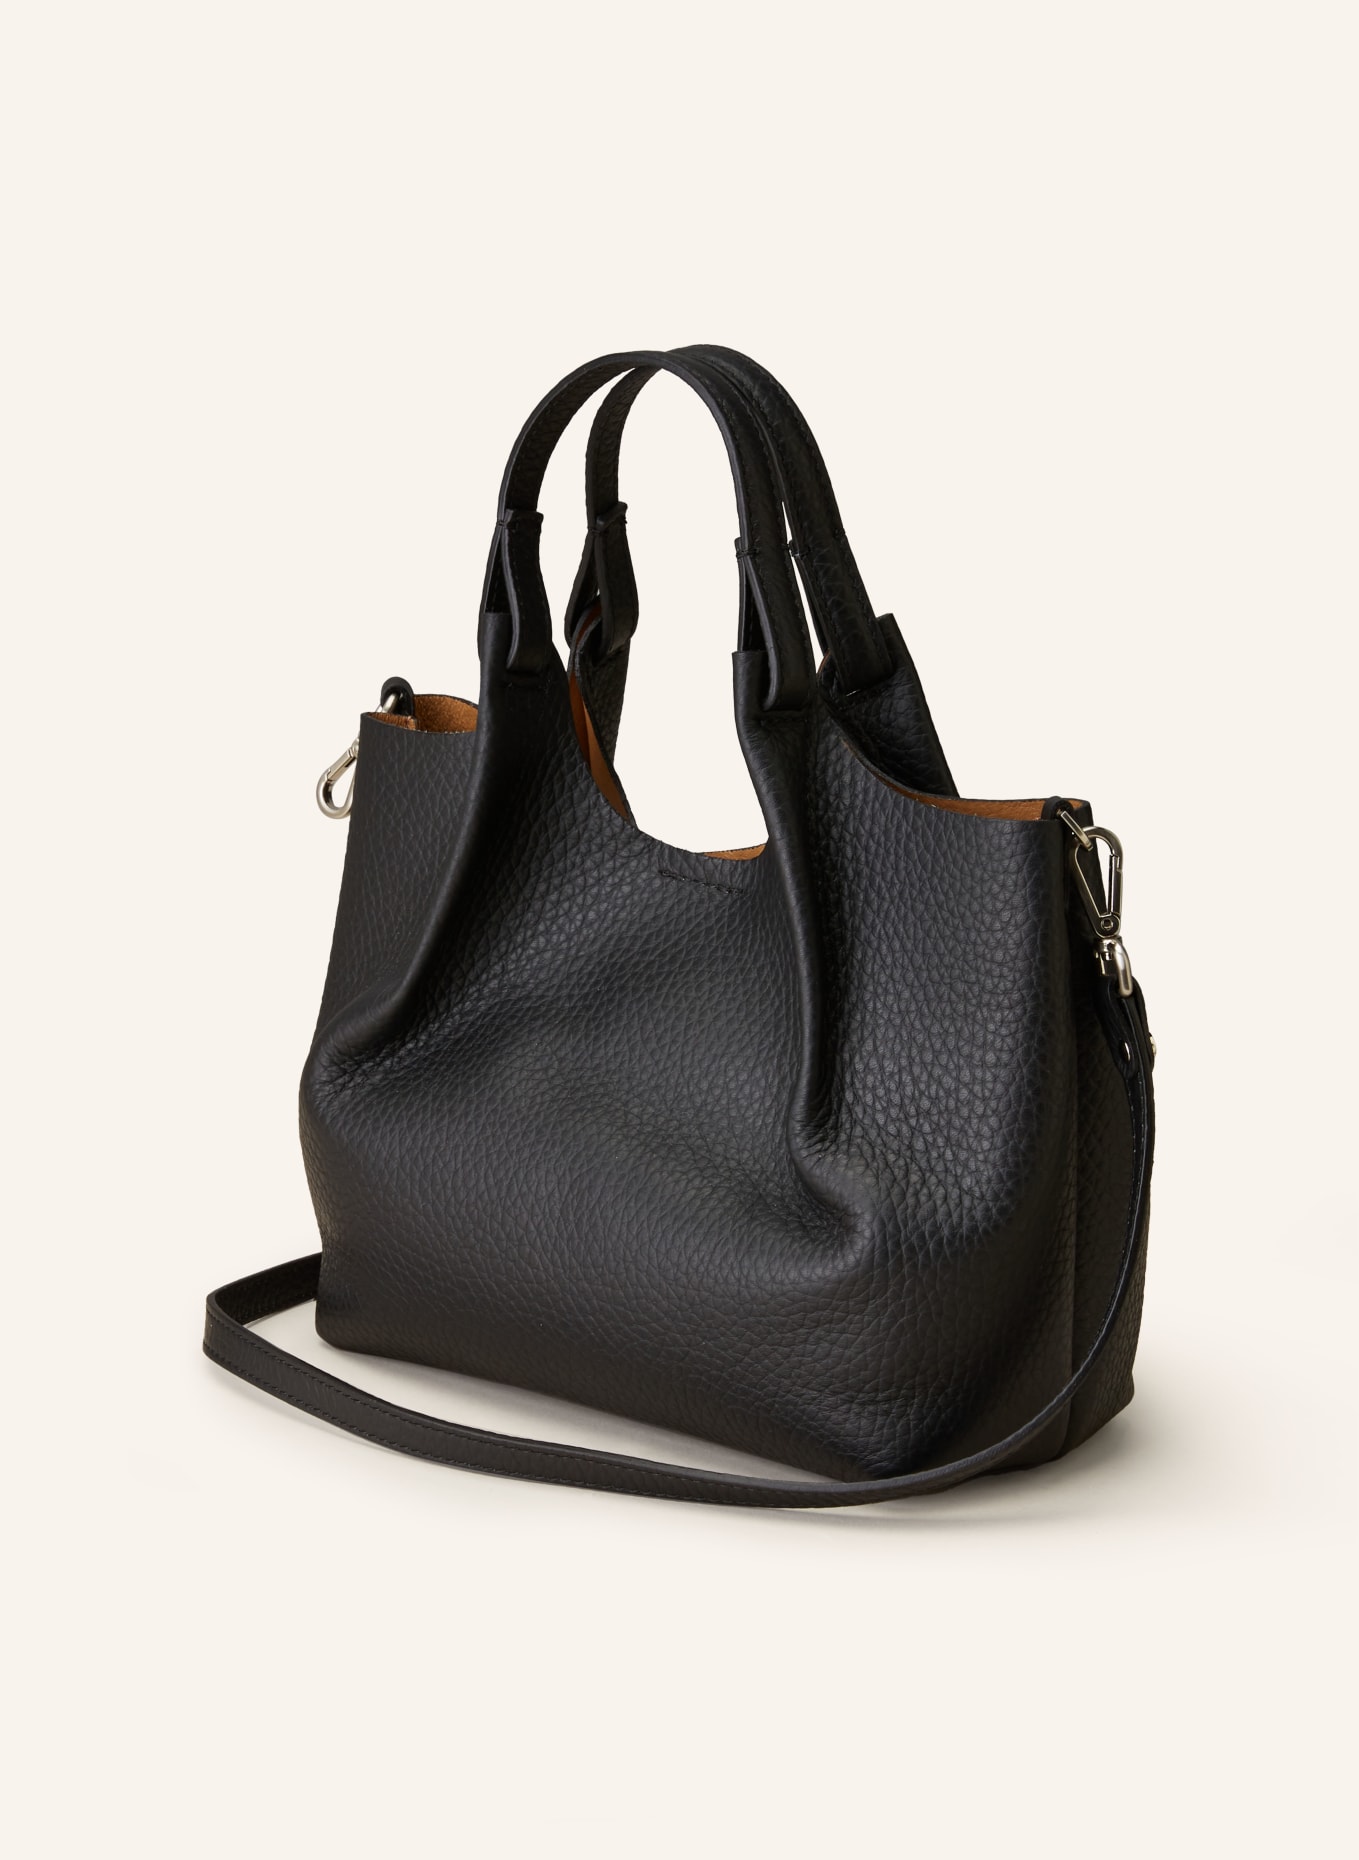 GIANNI CHIARINI Hobo bag with pouch, Color: BLACK/ BEIGE (Image 2)